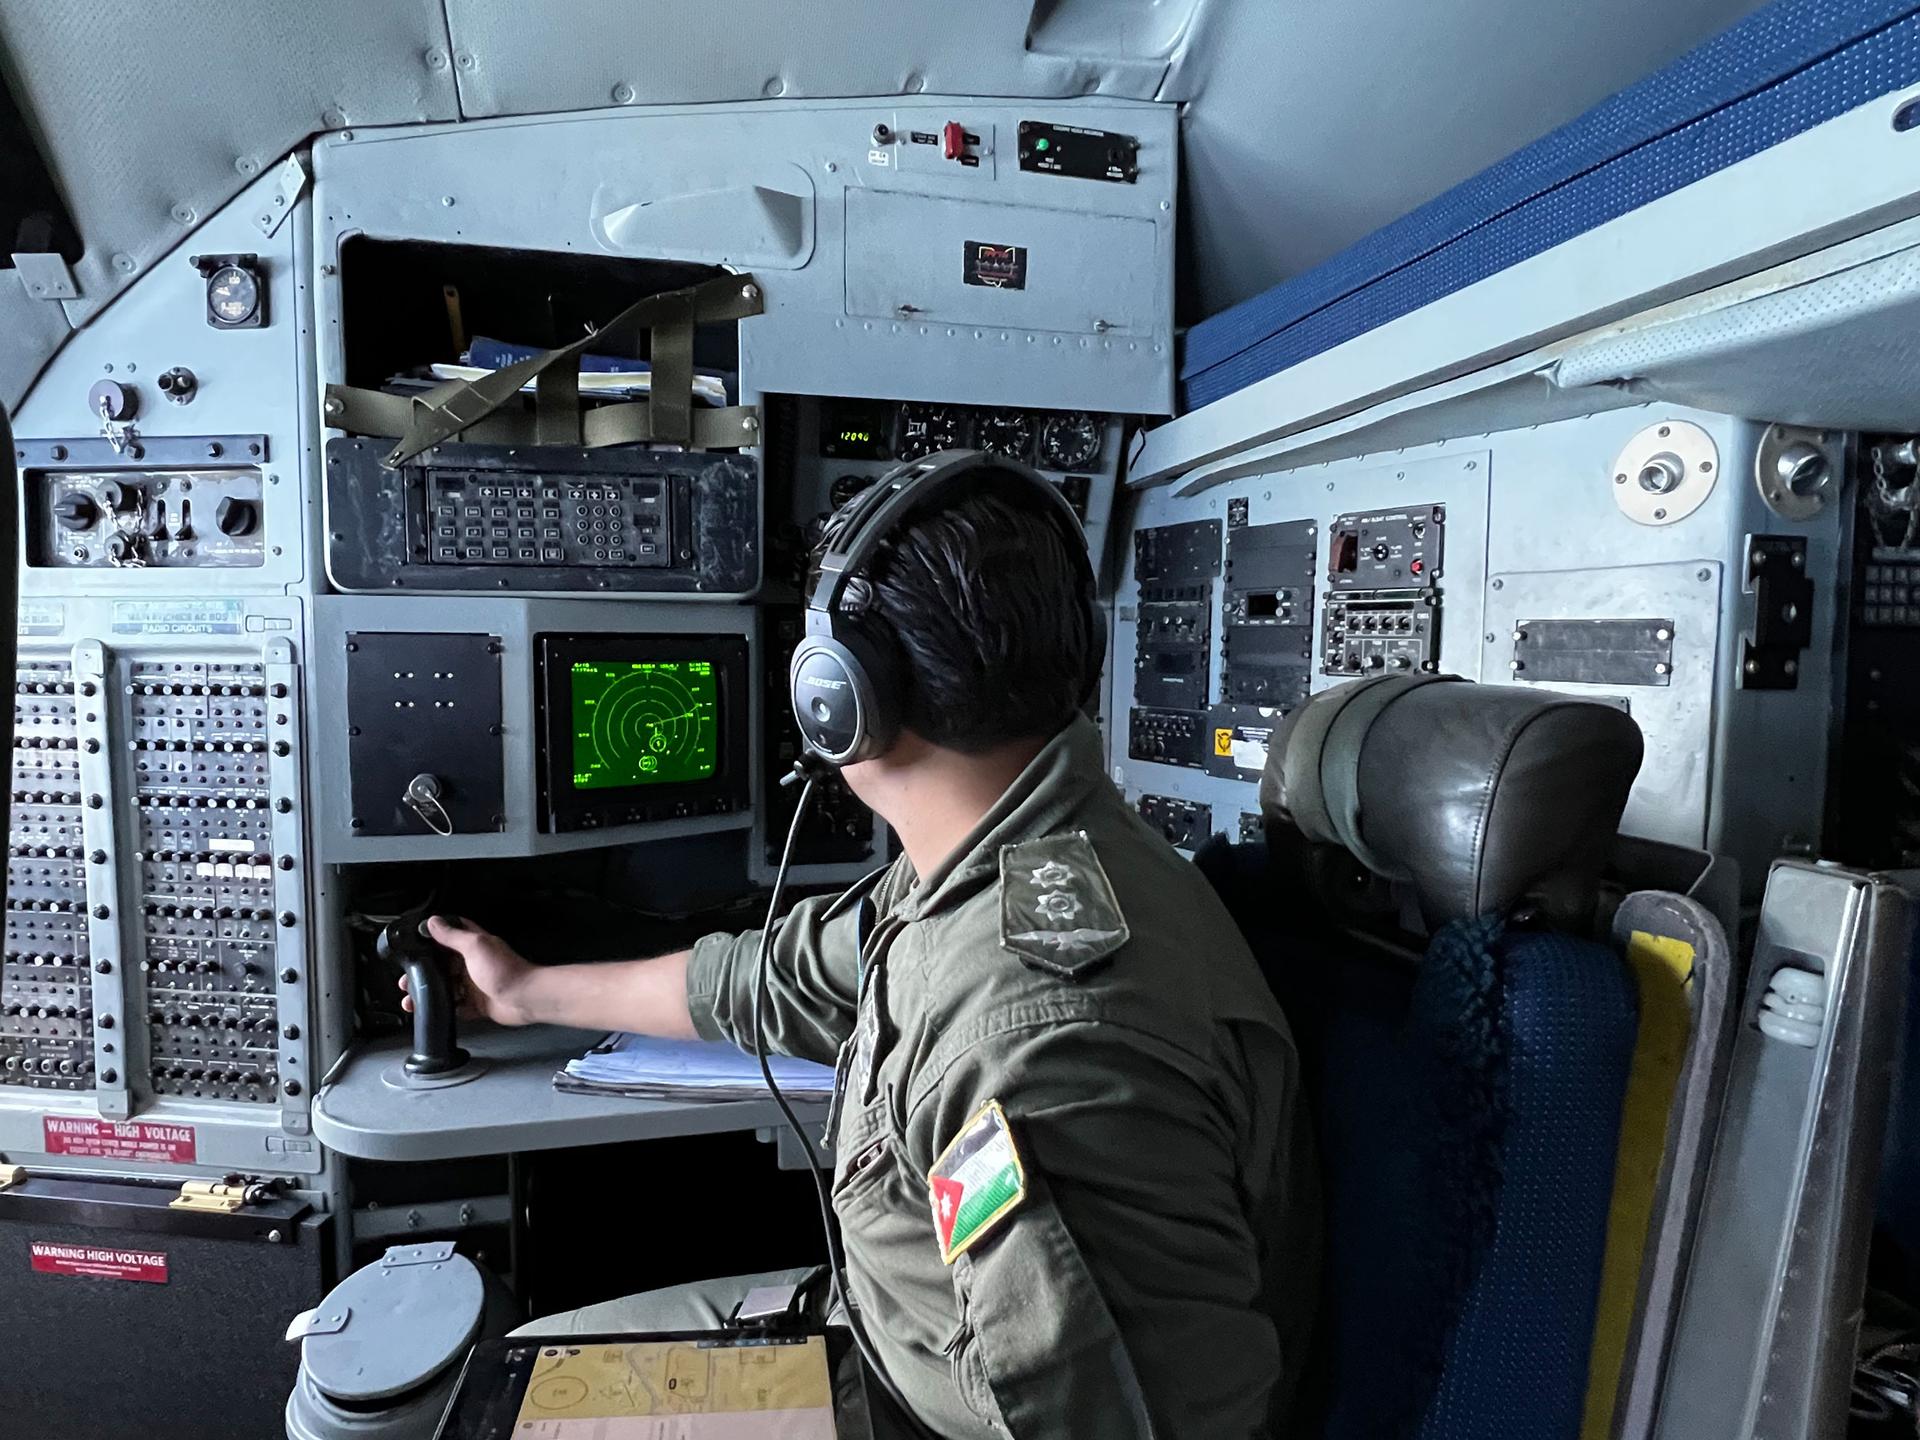 The view inside the cockpit of the military cargo plane carrying aid over Gaza.